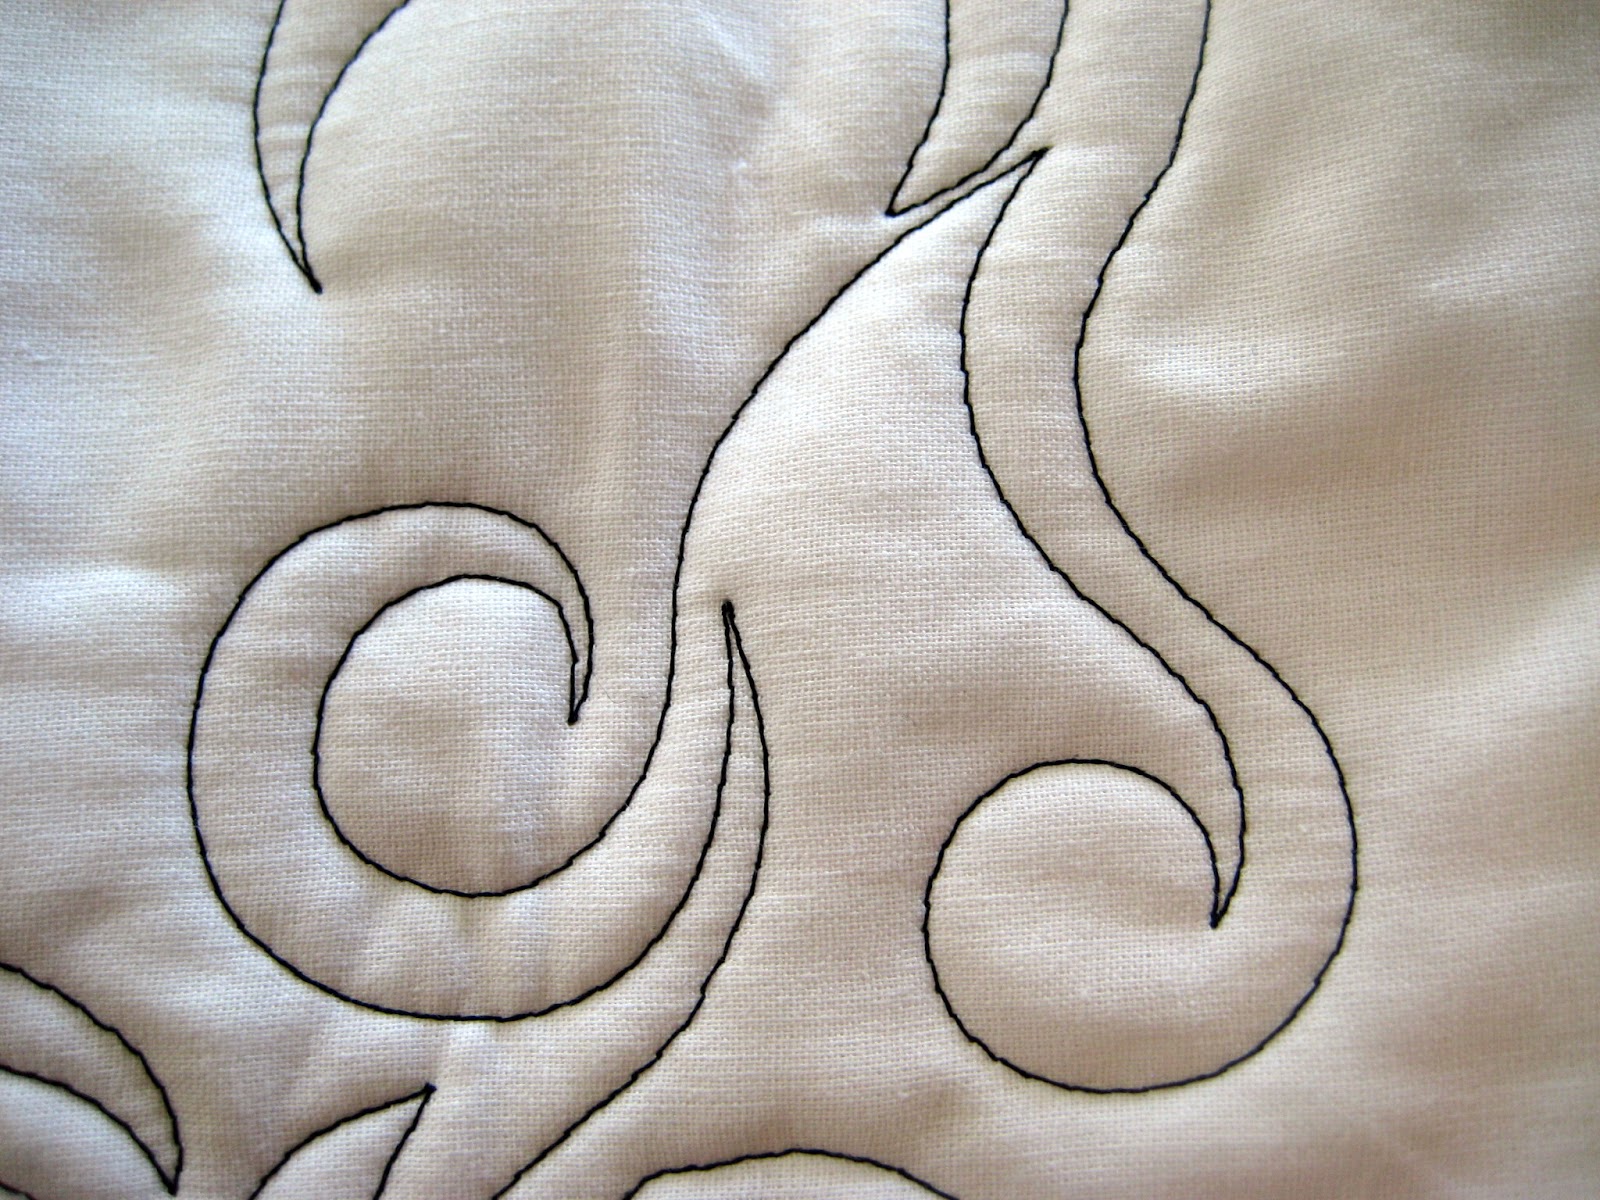 Spirals and scrolls for beginners in free motion quilting